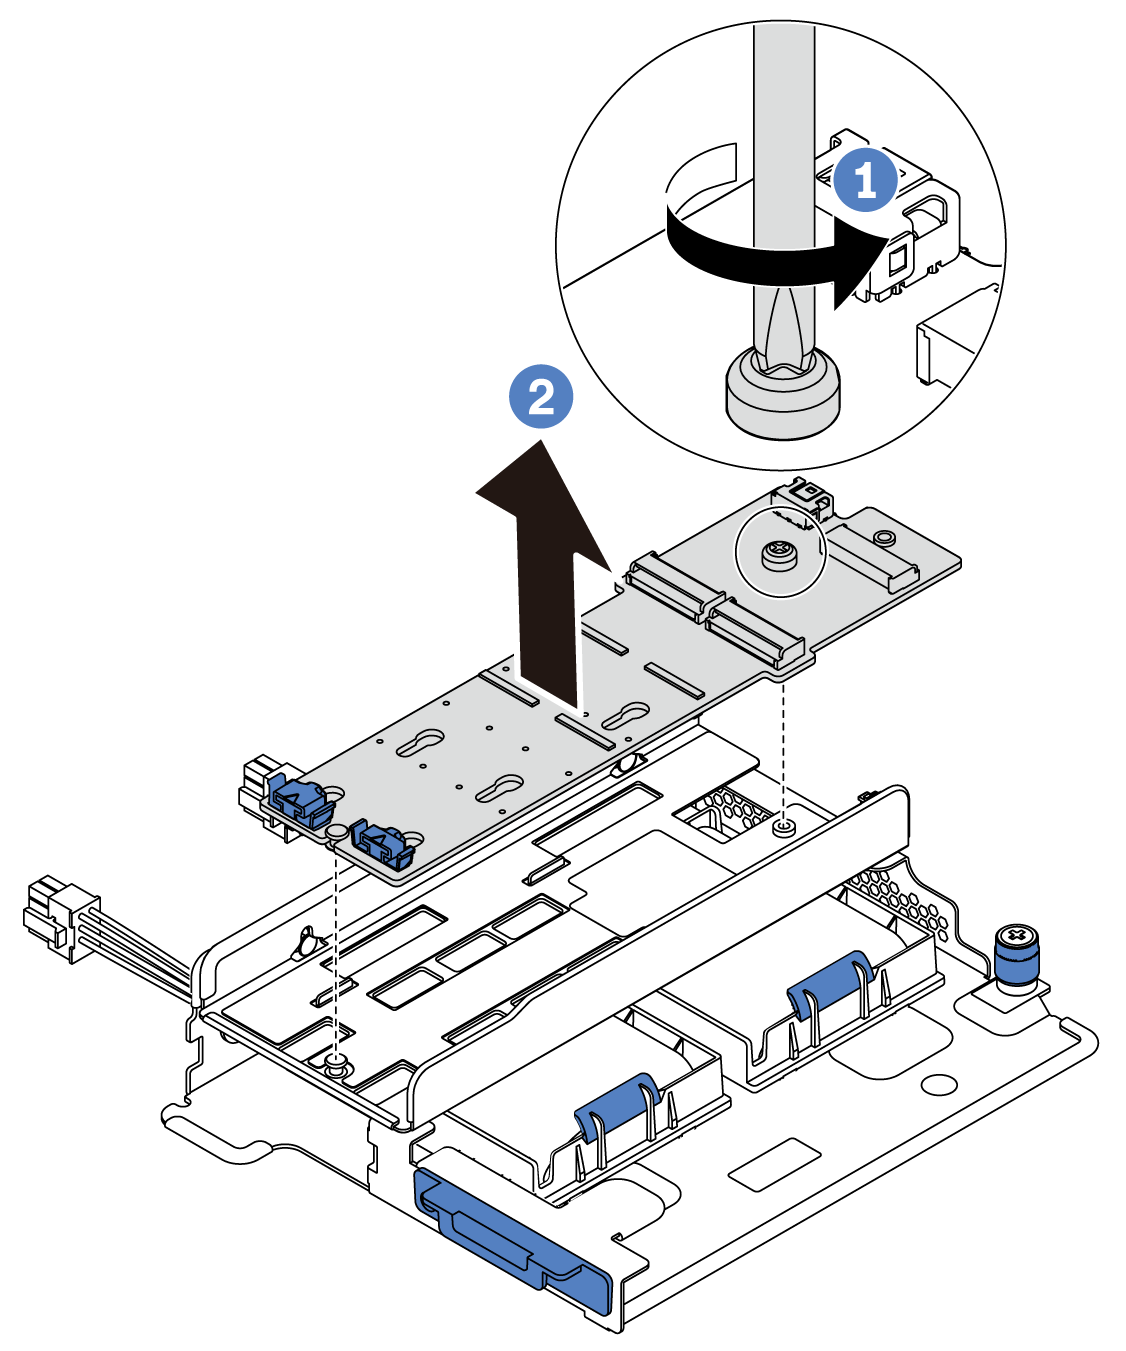 Remove the M.2 adapter from the tray.